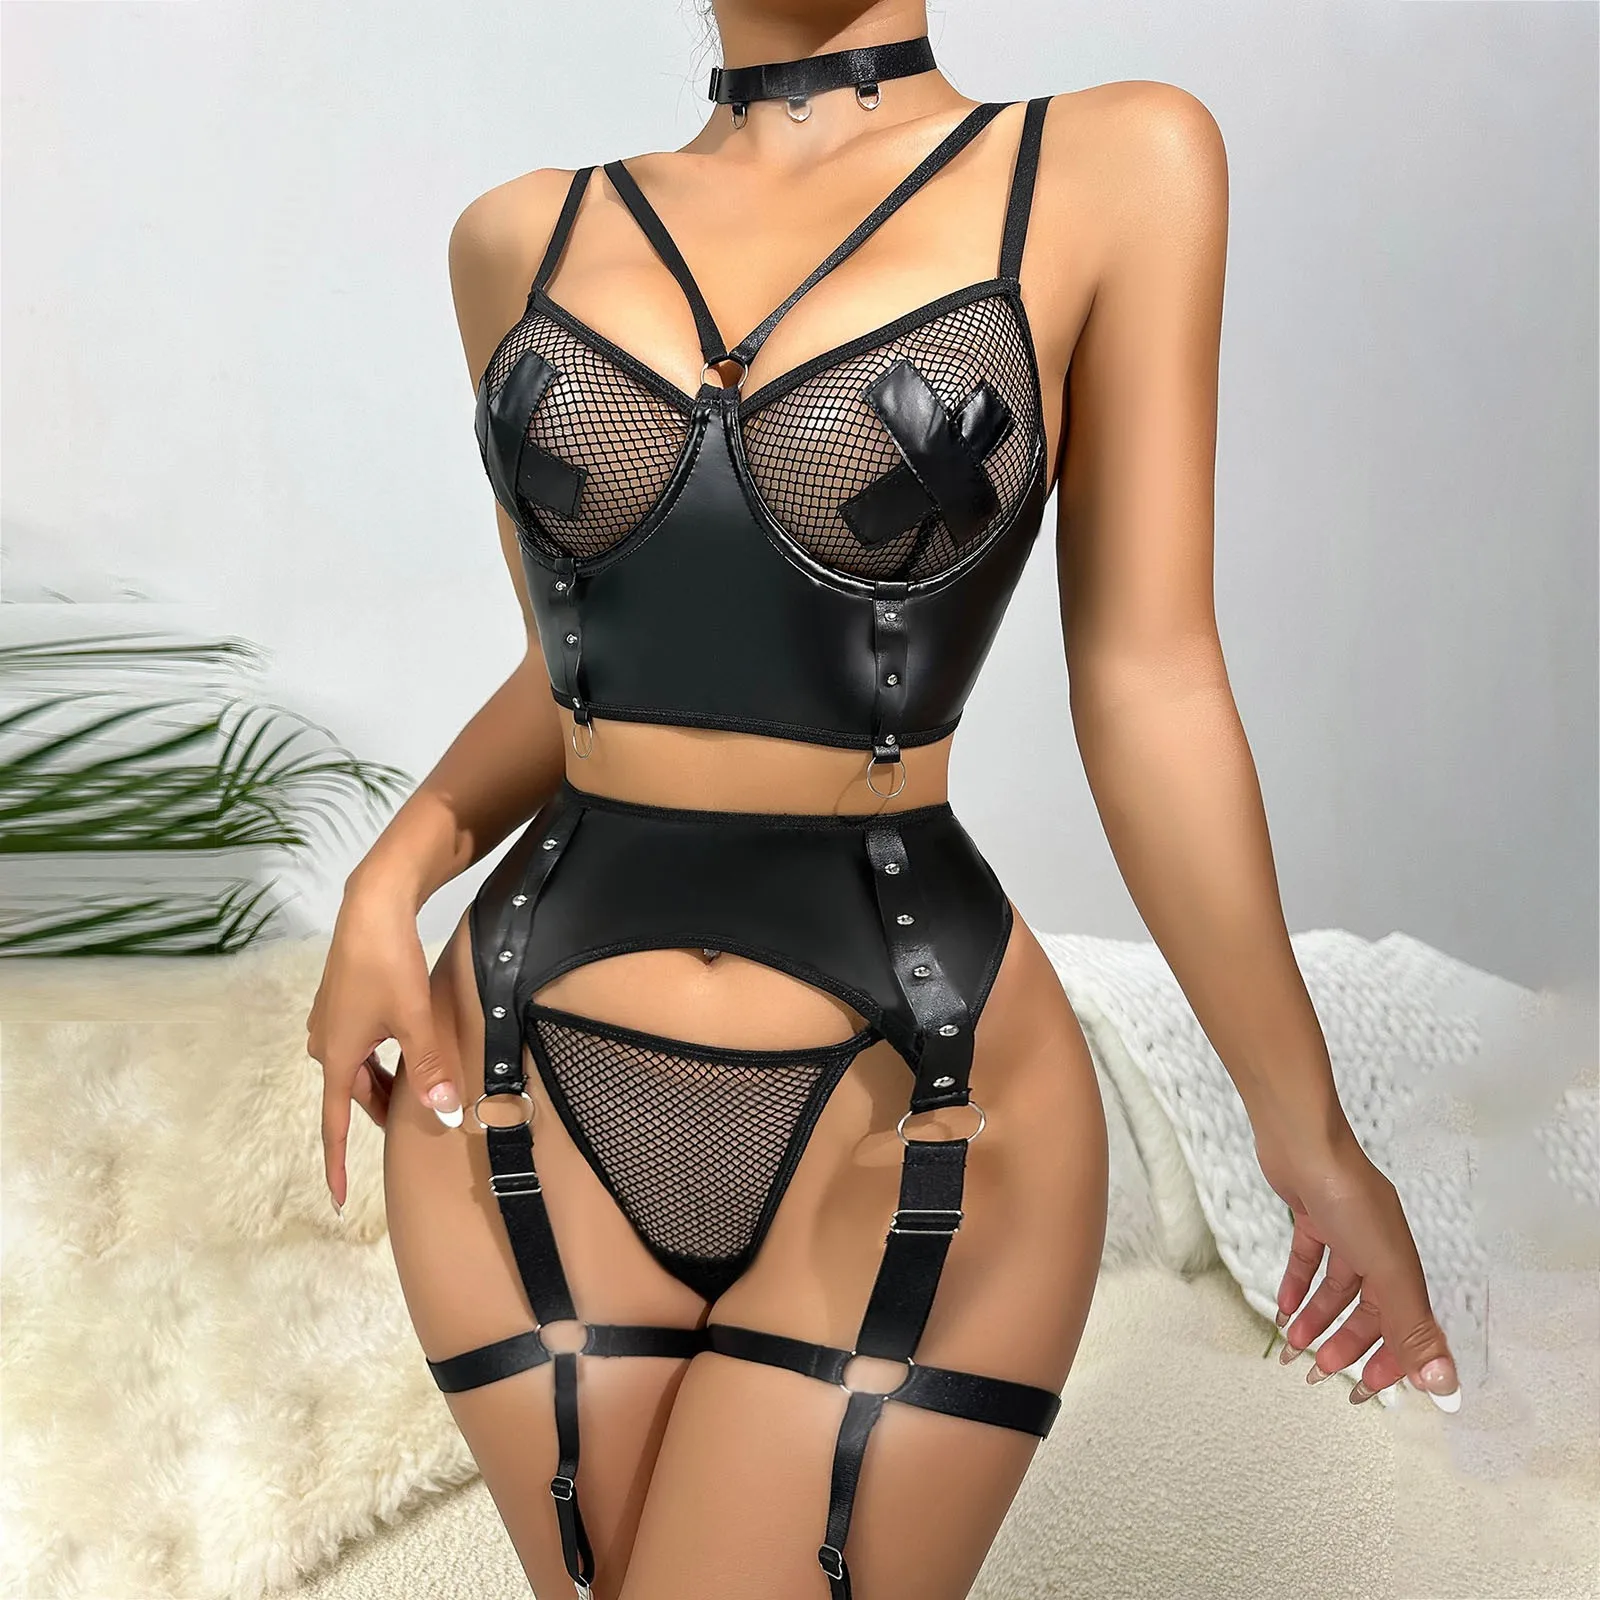 

Sensual Bondage Underwear For Ladies Perspective Mesh Bra And Panty Set For Women Sexy Garter Bell Chocker Sex Sexy Lingerie Set